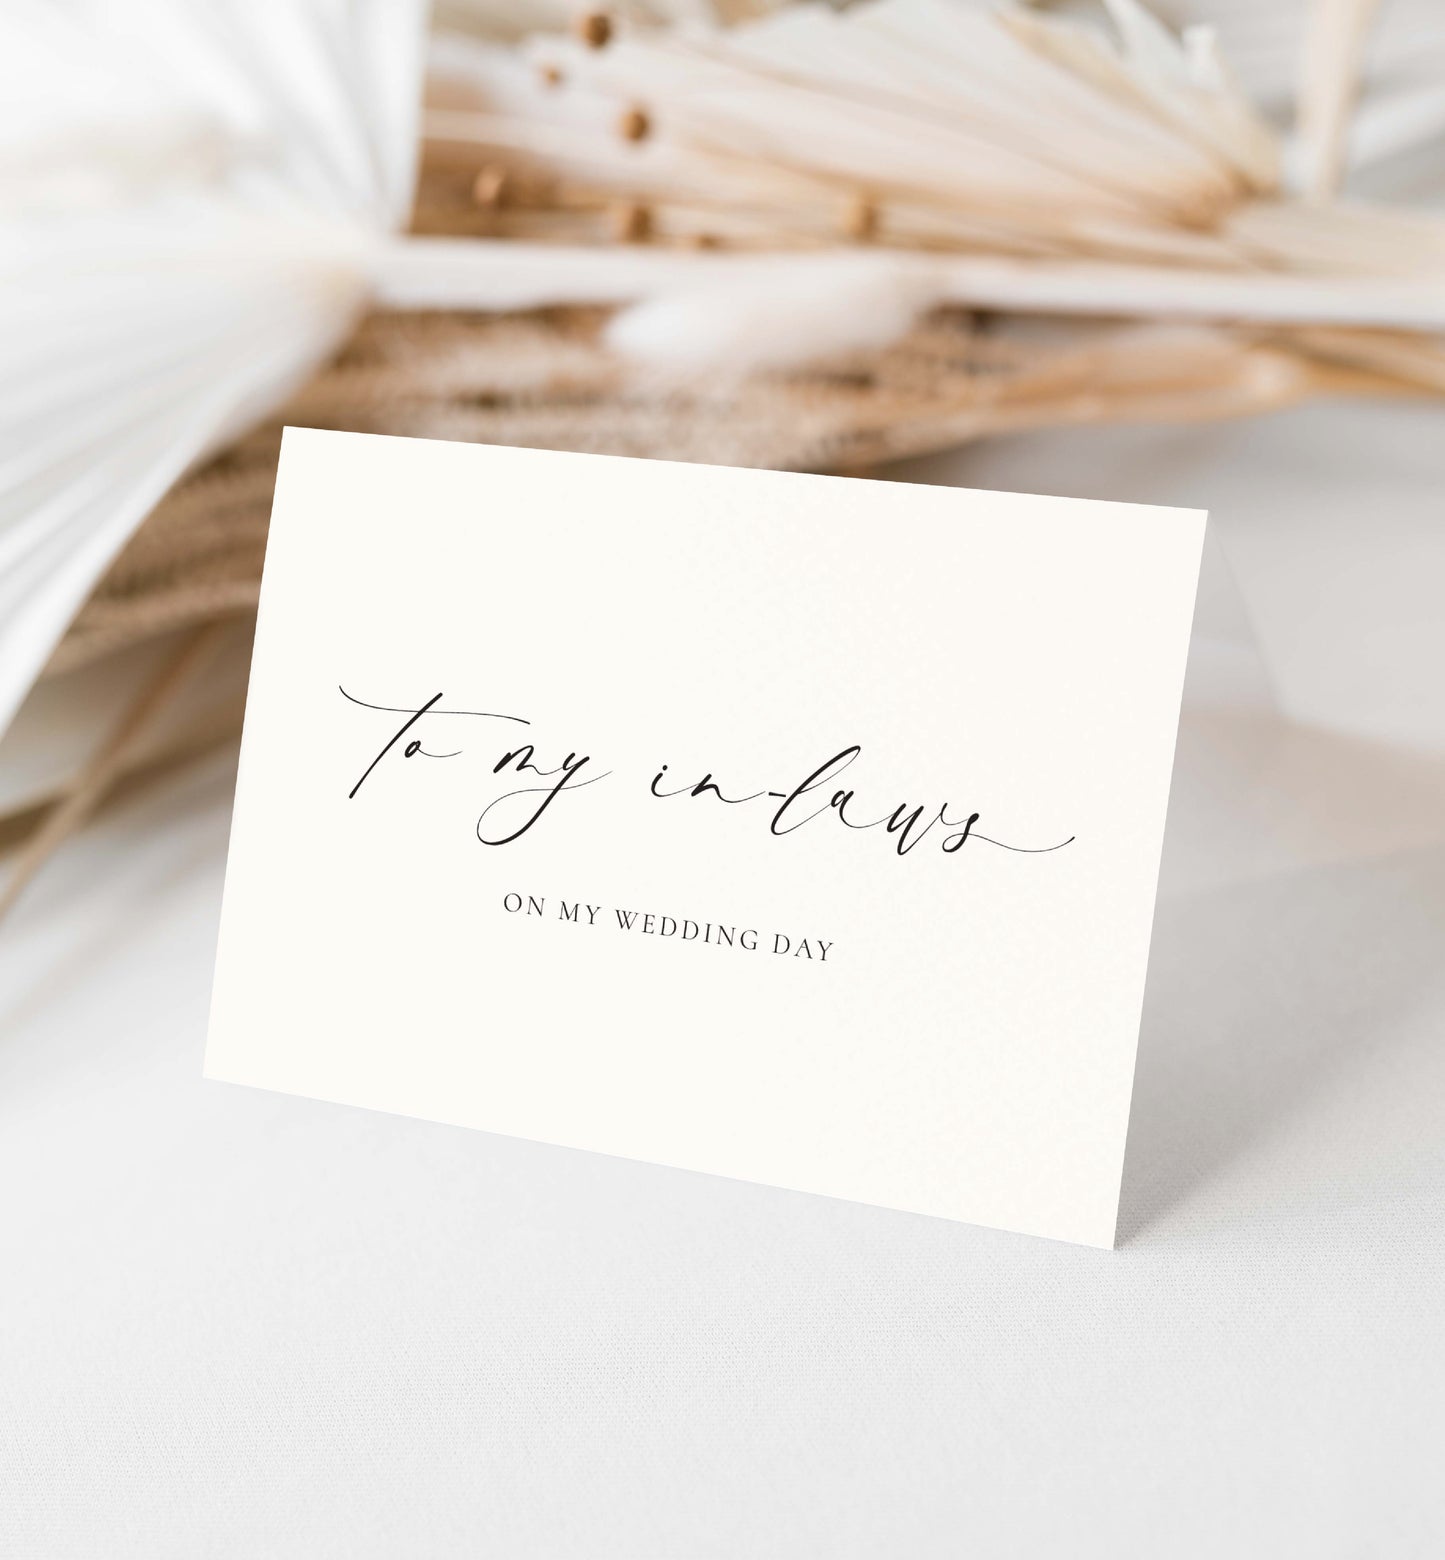 To My Parents and In-Laws On My Wedding Day Card Set, Minimalist Wedding Day Cards, To Parents Wedding Day Card, Off White Ivory, Ellesmere